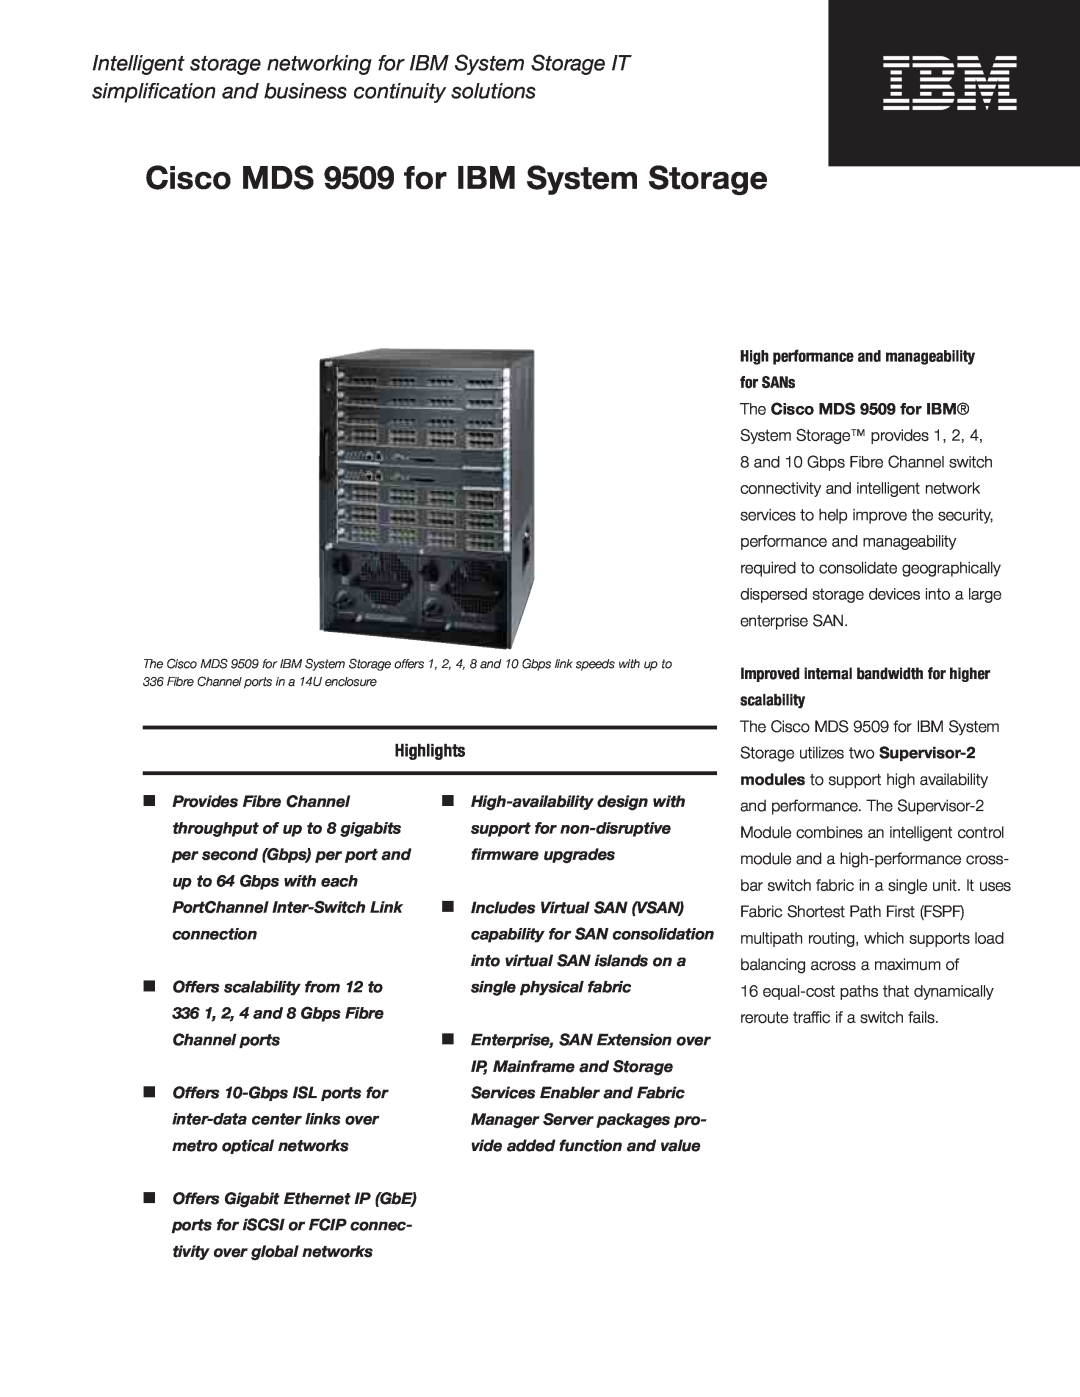 IBM manual Highlights, High performance and manageability for SANs, Cisco MDS 9509 for IBM System Storage 